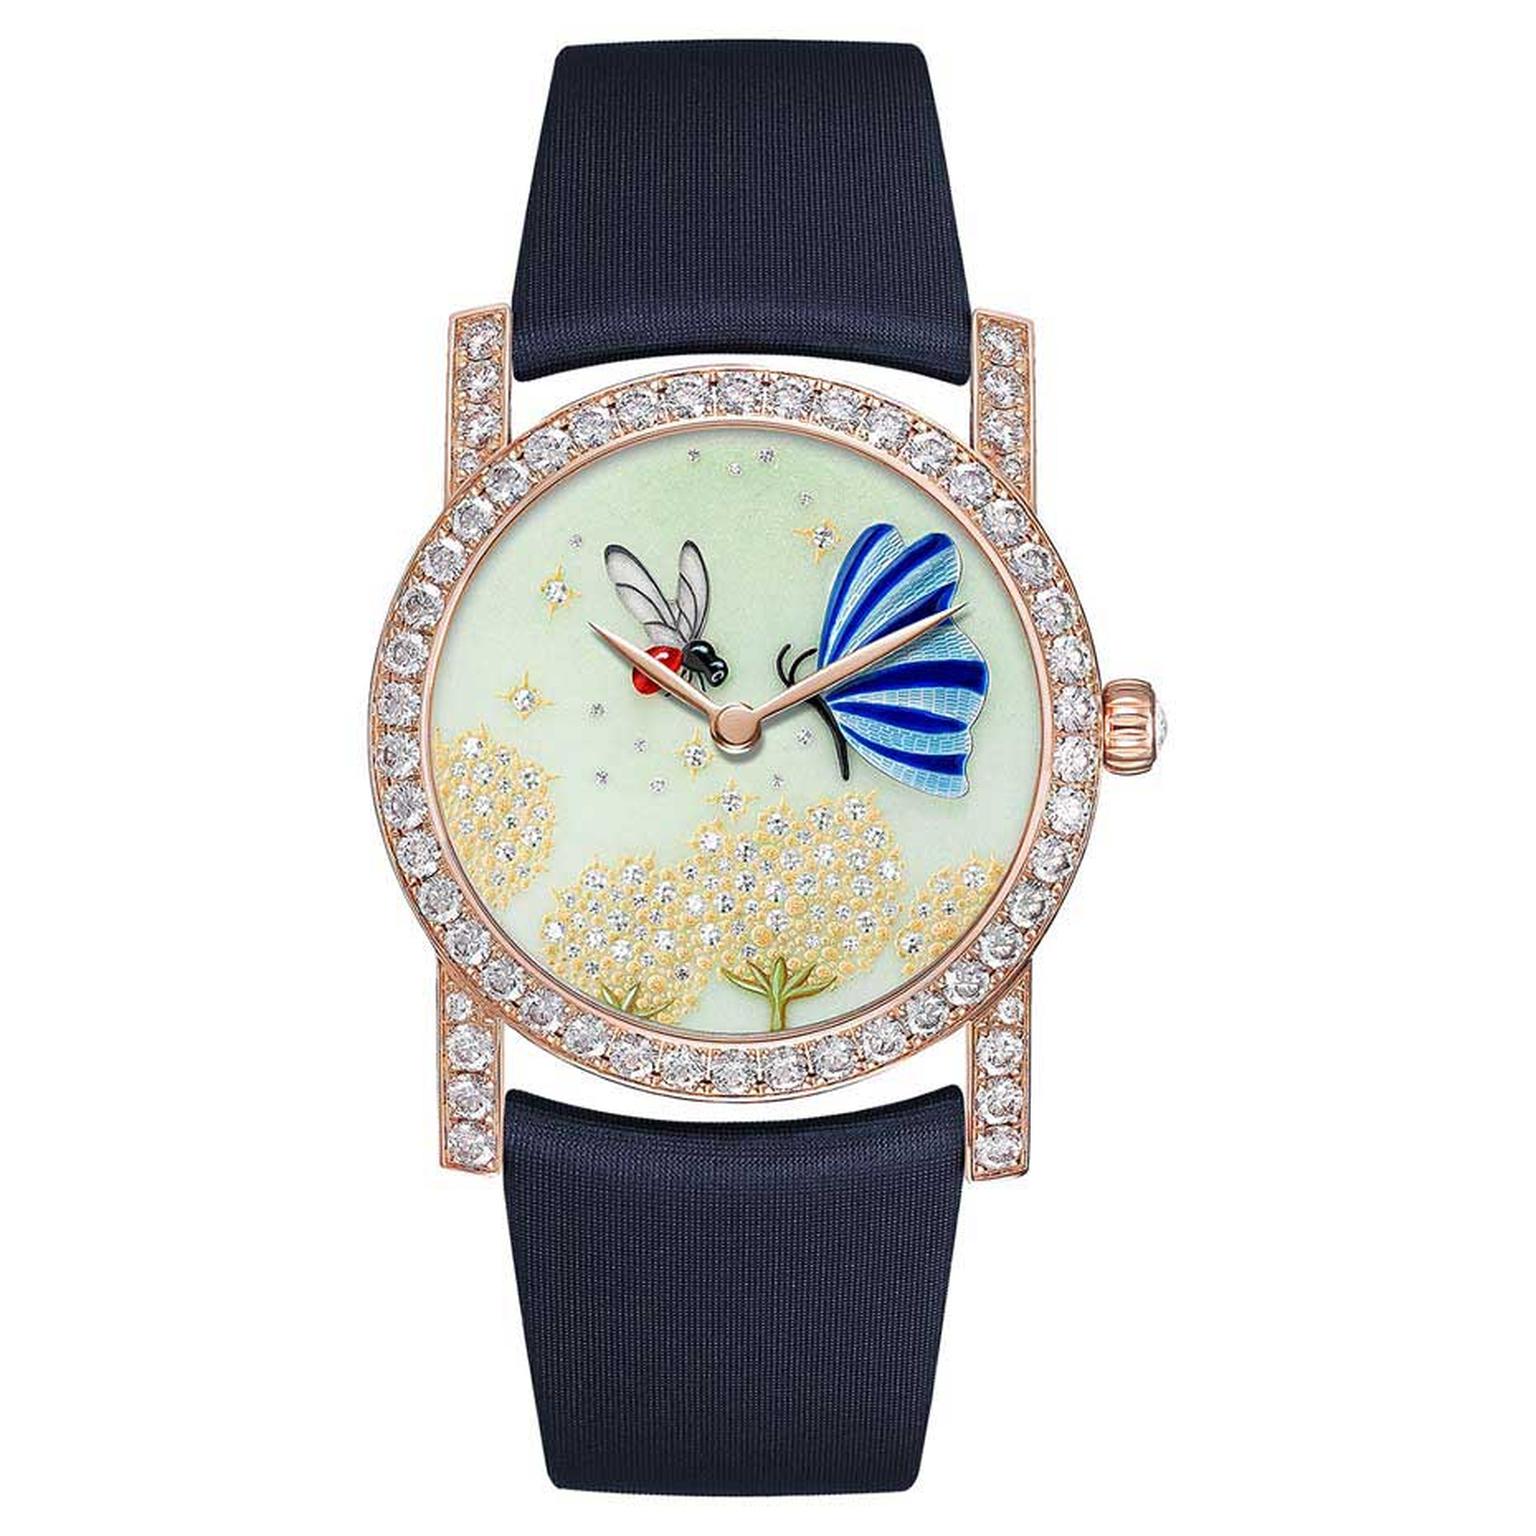 Chaumet Attrape-moi…si tu m’aimes collection watch featuring a bee with wings made out of rock crystal and a butterfly, both hand-painted on mother of pearl, hovering over golden dandelion flowers set with brilliant-cut diamonds.